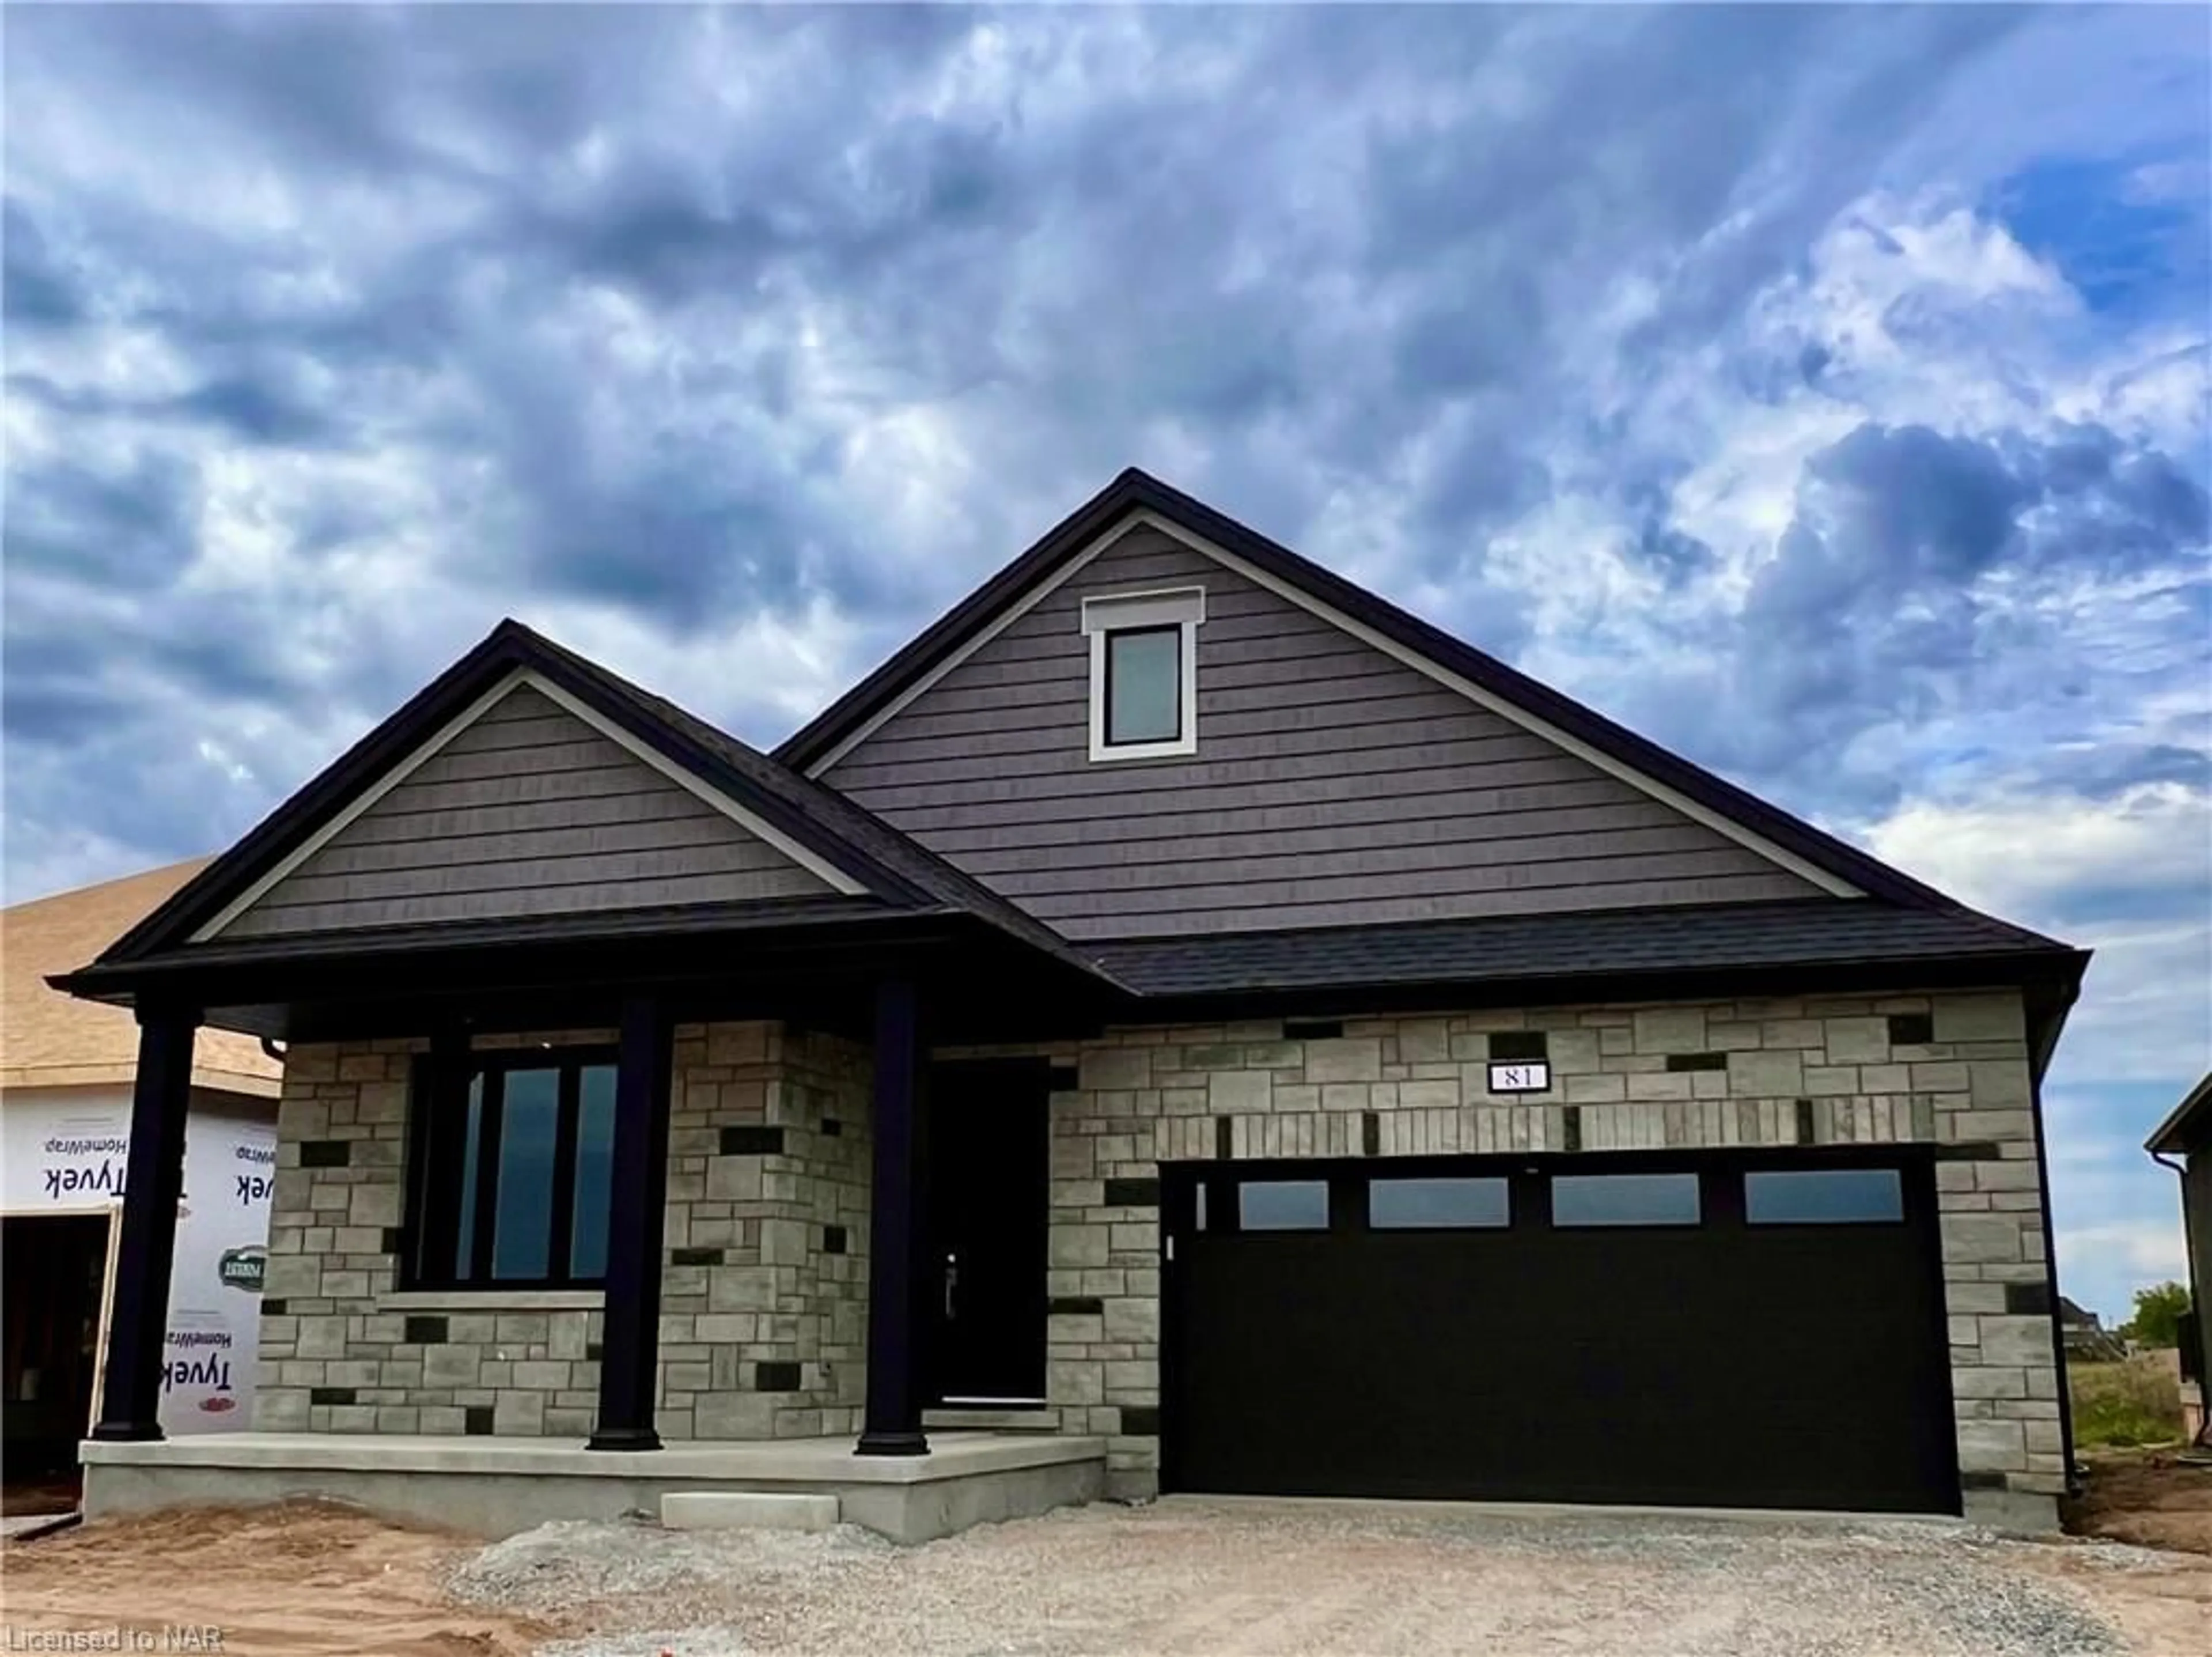 Home with brick exterior material for 82 Homestead Dr, Niagara-on-the-Lake Ontario L0S 1T0